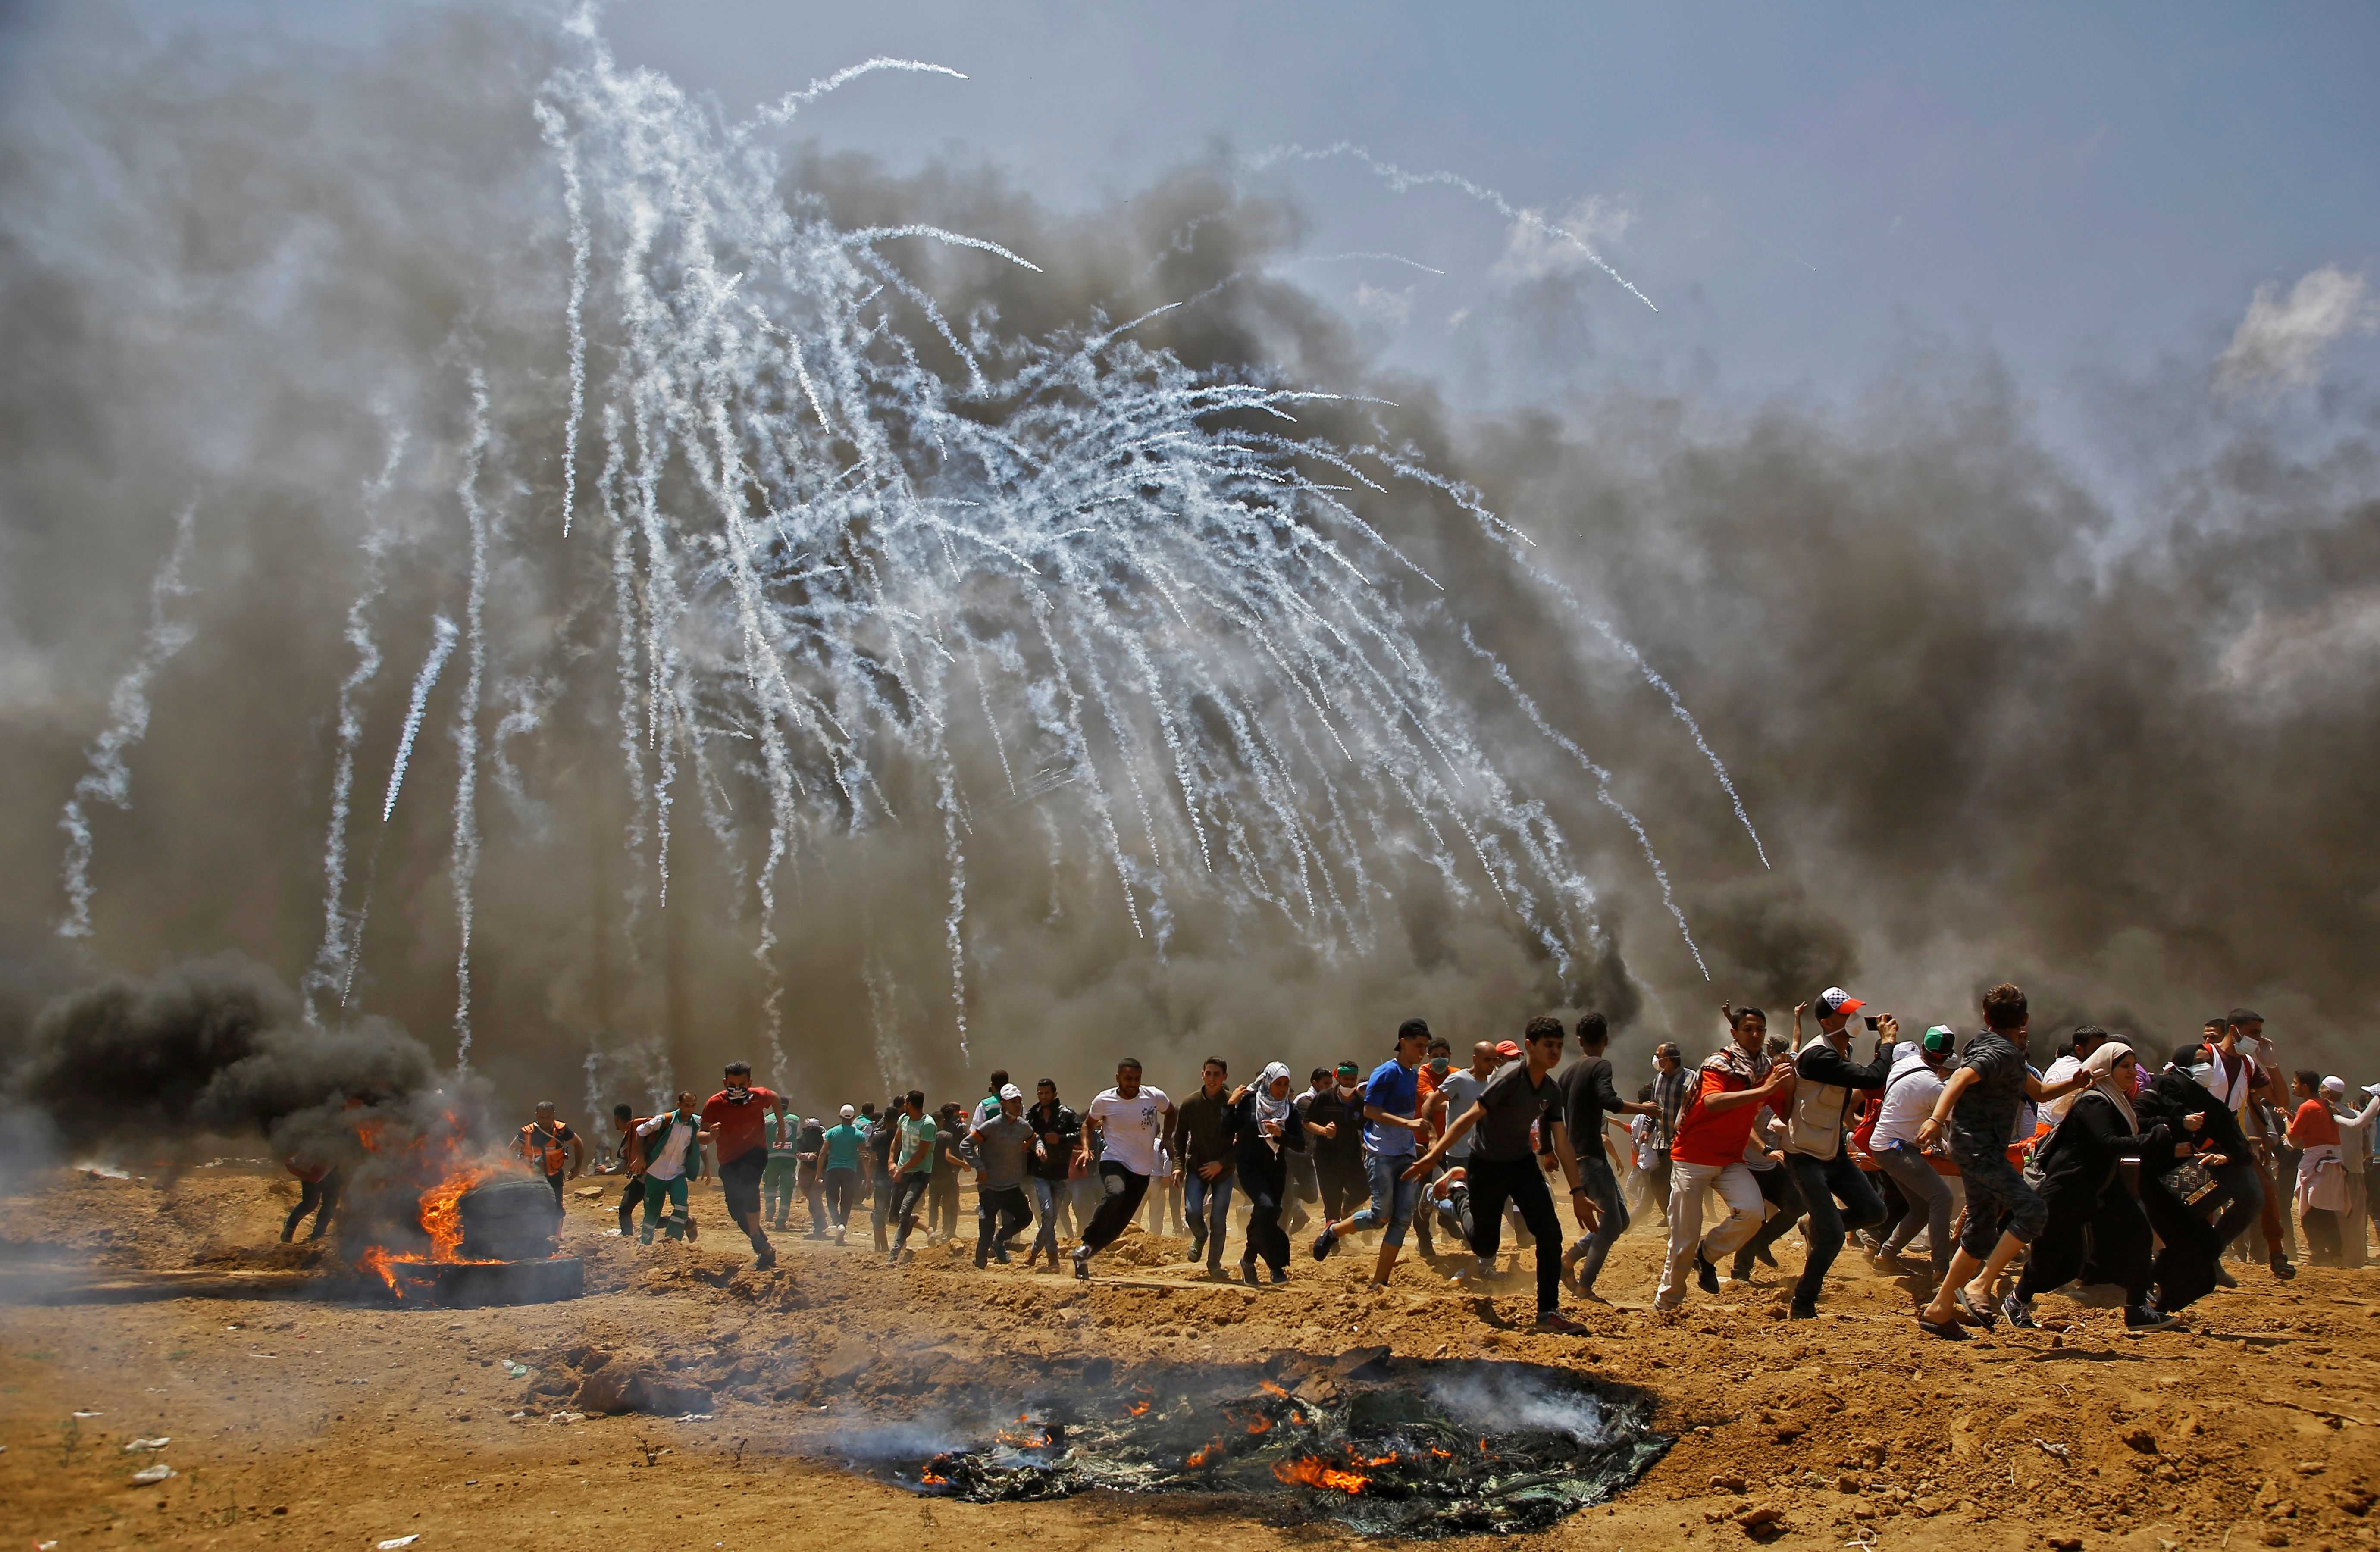 Palestinians run for cover from tear gas during clashes with Israeli security forces near the border between Israel and the Gaza Strip, east of Jabalia on May 14, 2018.